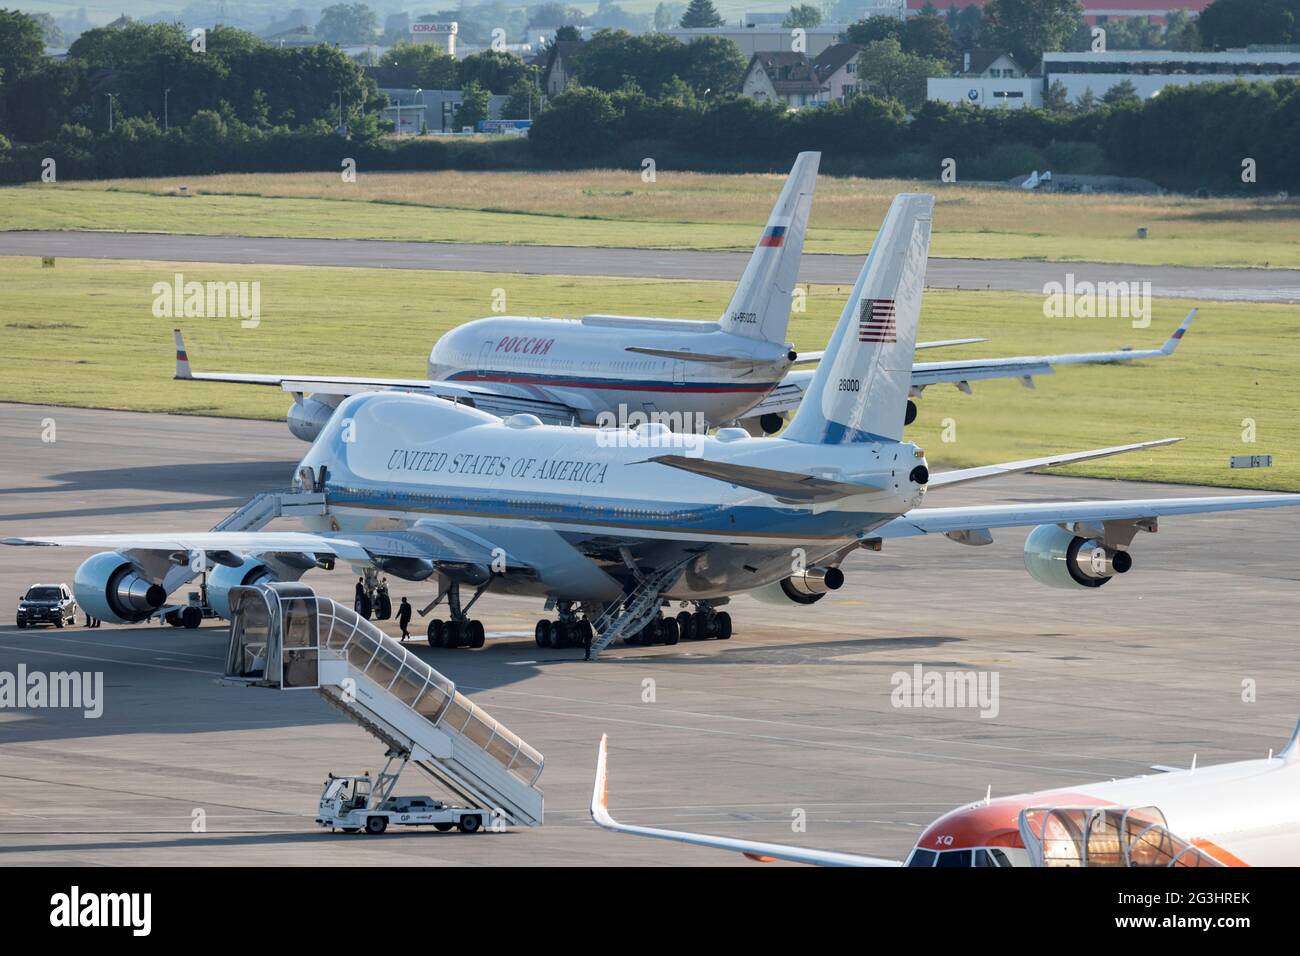 Air Force One, the Boeing-747 airplane of U.S. President Joe Biden, stands  by, as the Iljuschin Il-96, presumably carrying Russian President Vladimir  Putin, taxies to the runway after the US - Russia